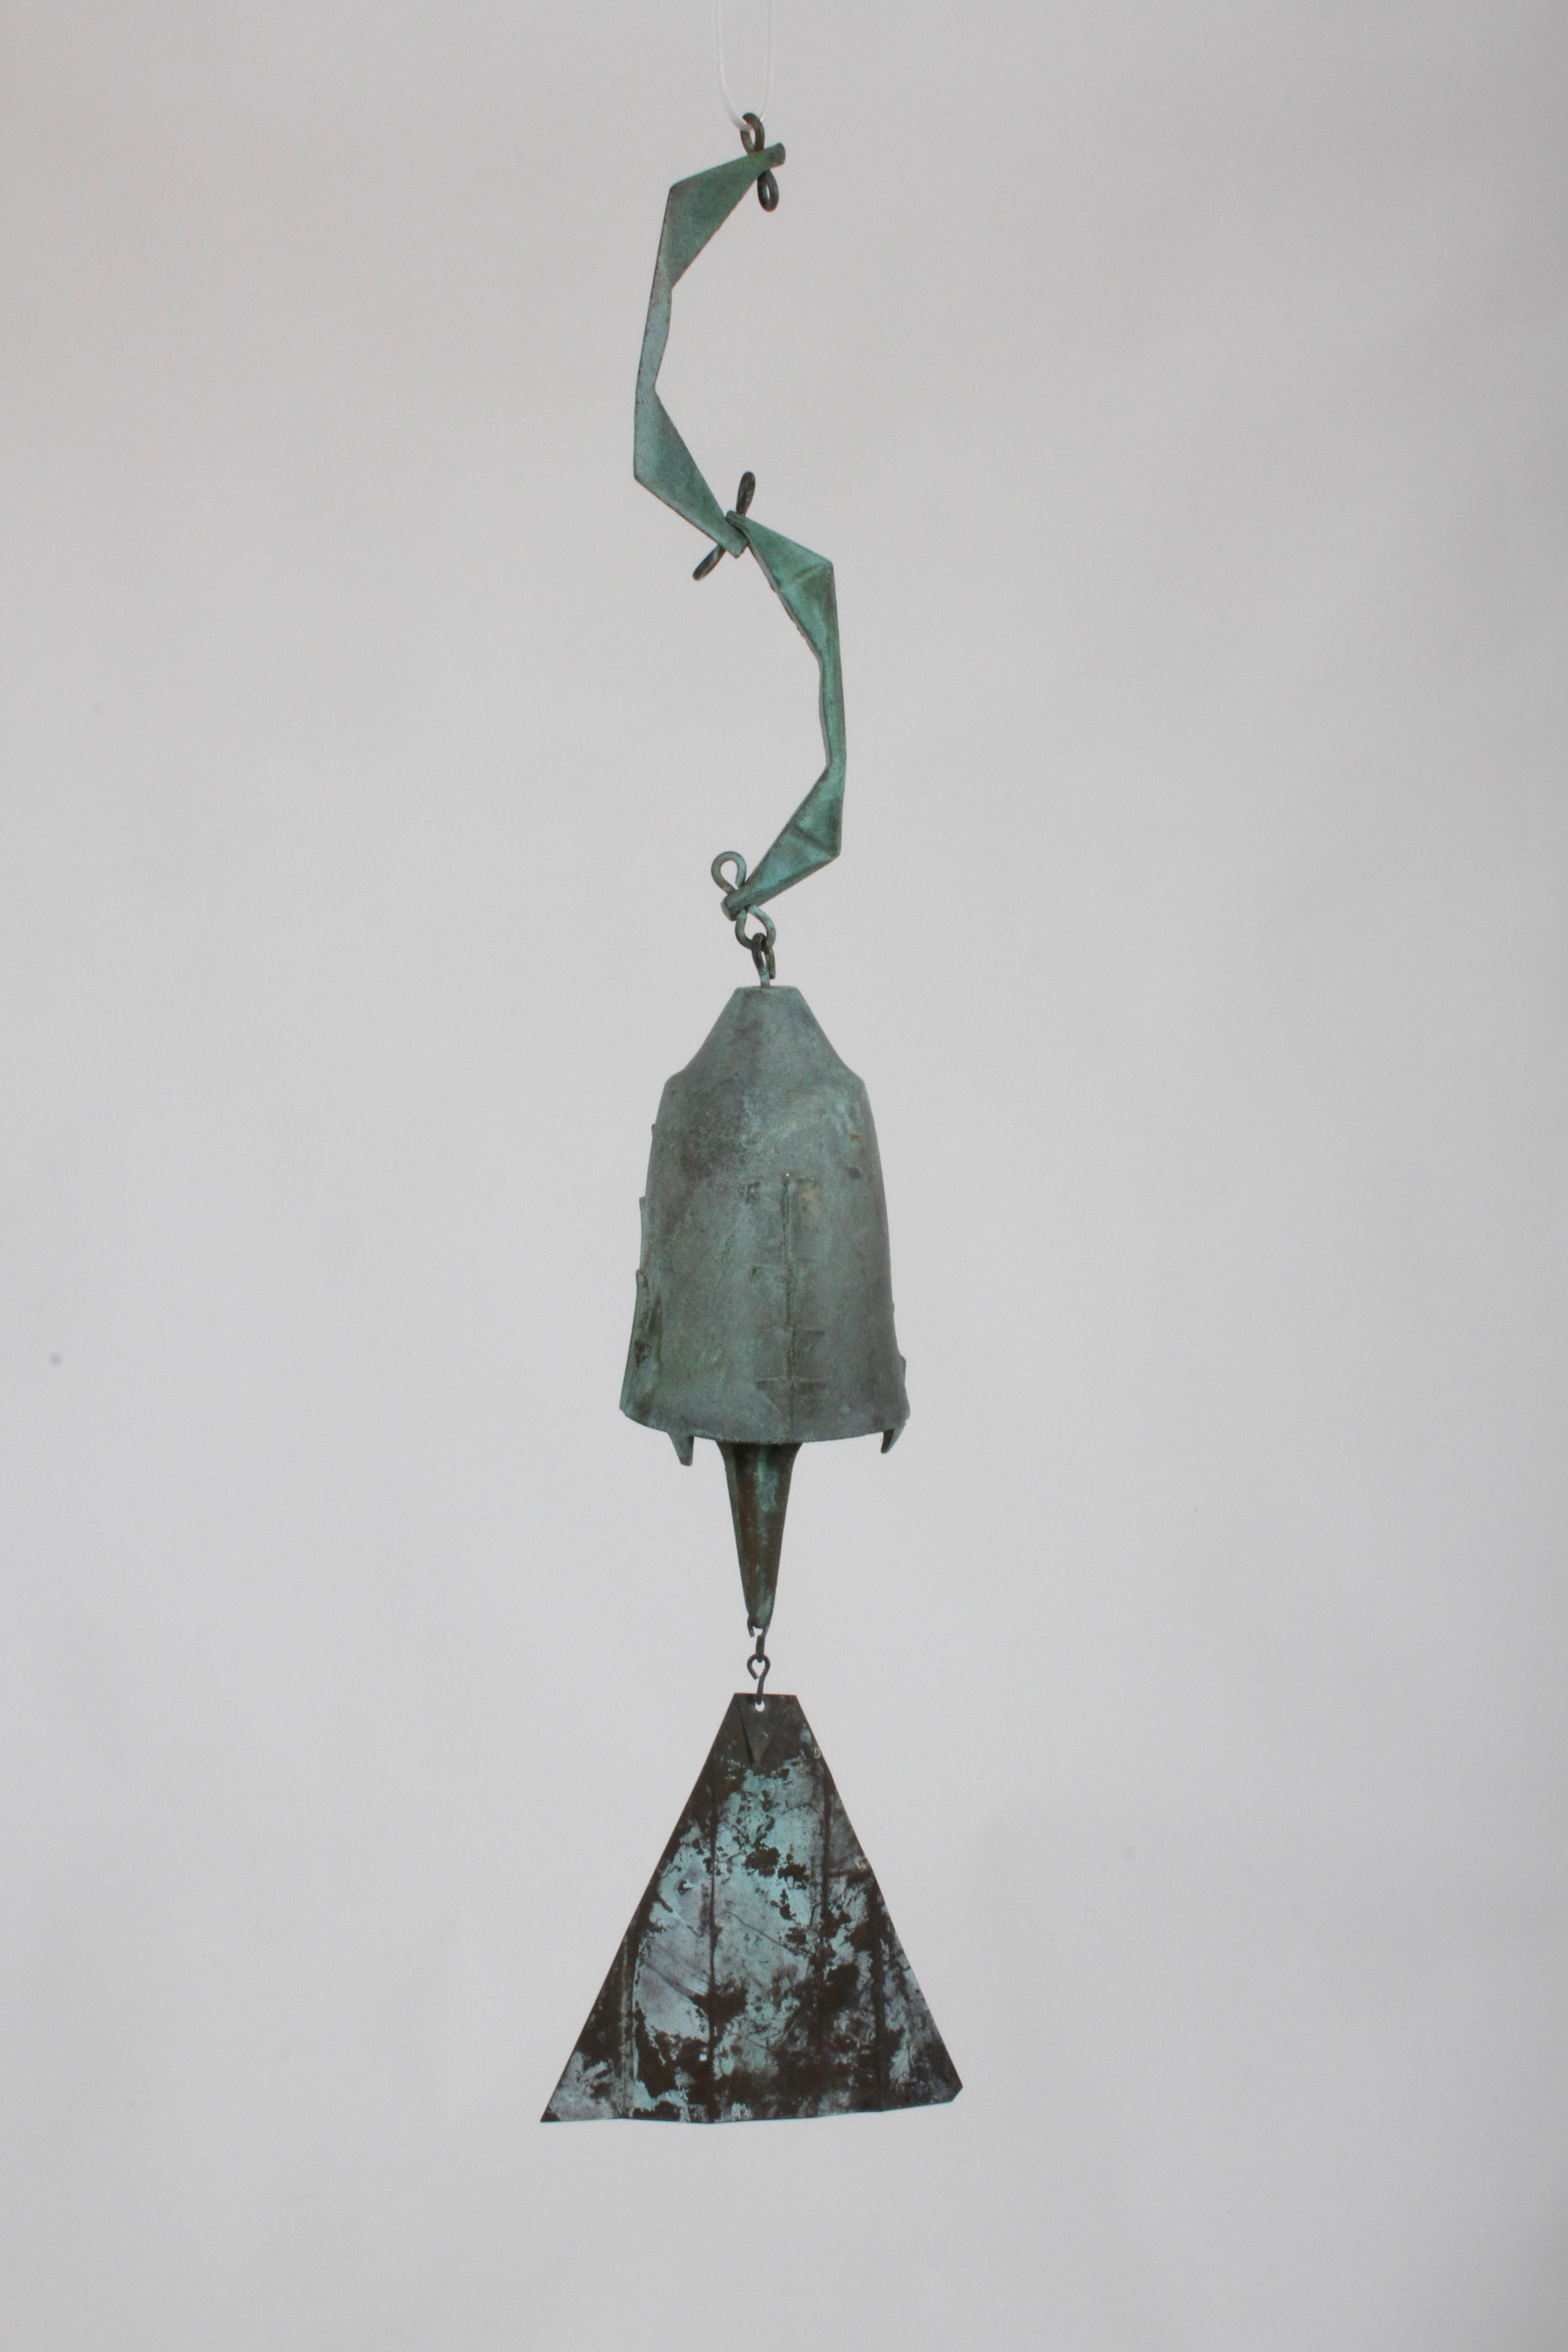 Early cast bronze sculptural wind chime or bell with great patina by Italian-born visionary architect and artist, Paolo Soleri. This piece was made by the artist at his Cosanti studio in Arizona and is signed with his stamp or insignia, 1950s. Paolo